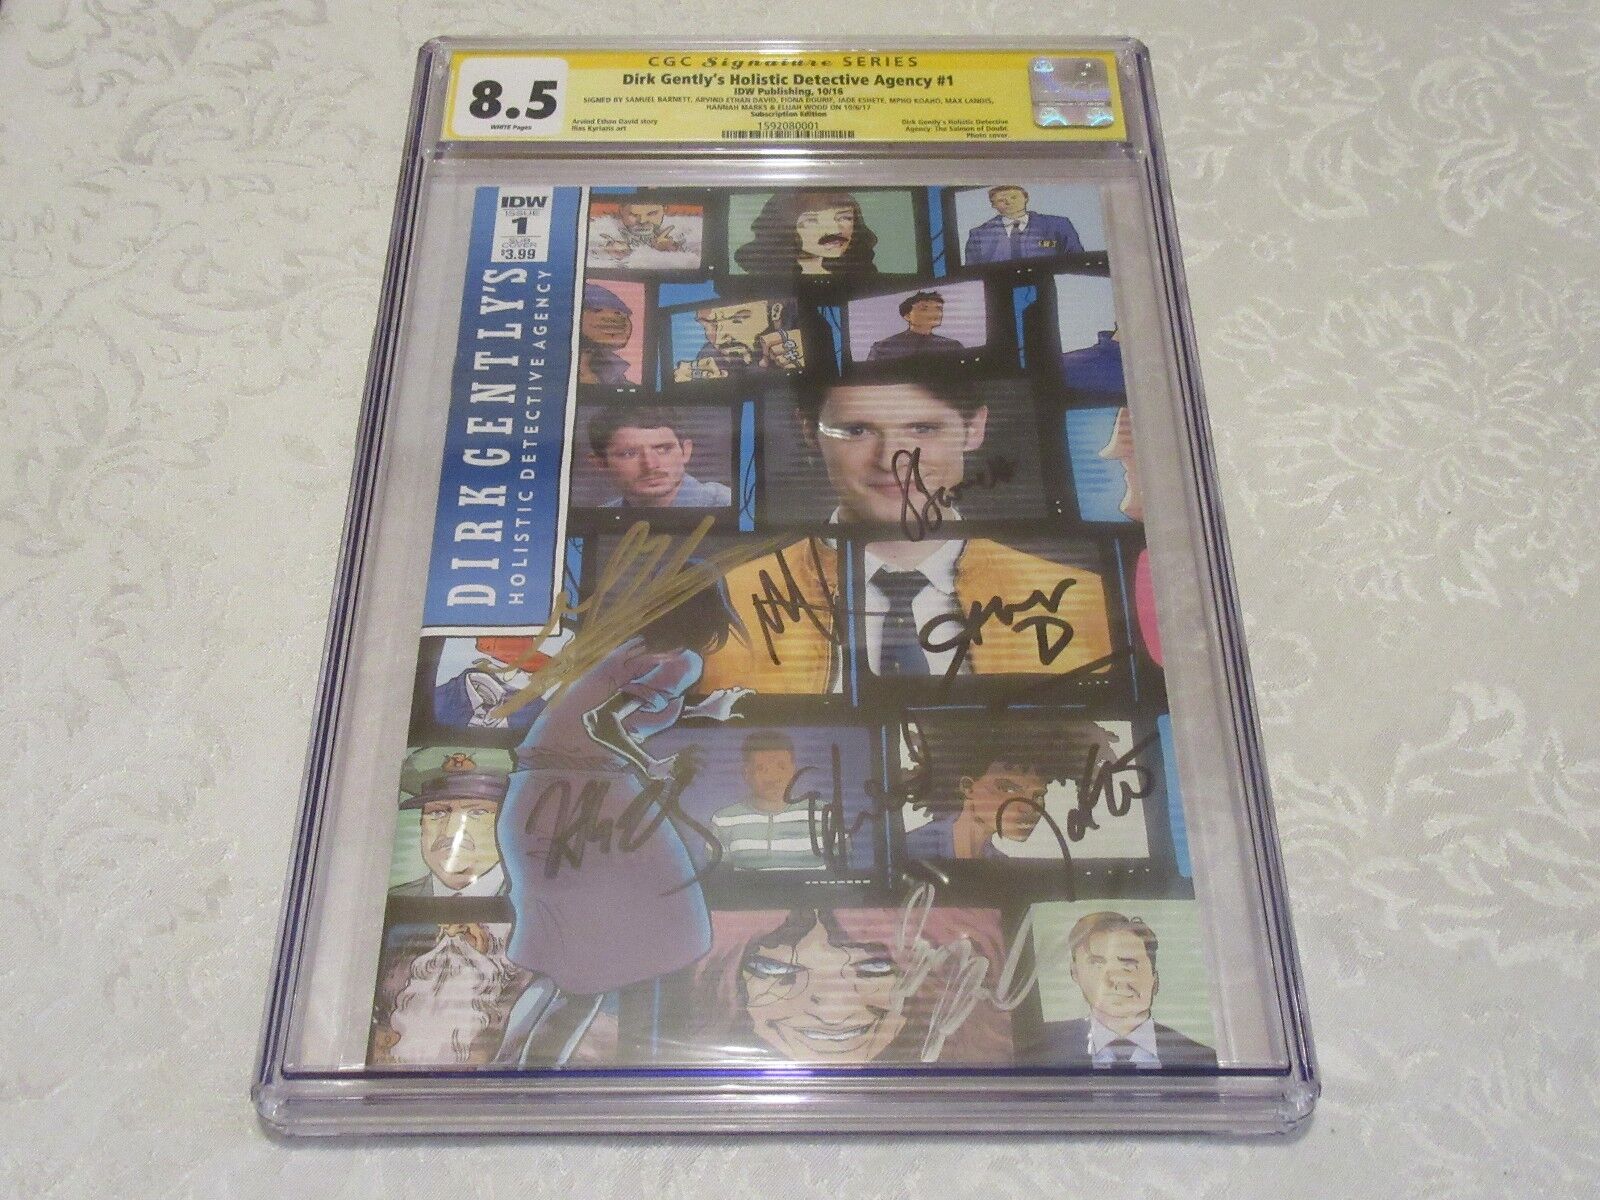 CGC Signature Series Dirk Gently\'s Hollistic Detective Agency #1 Signed Cast 8.5